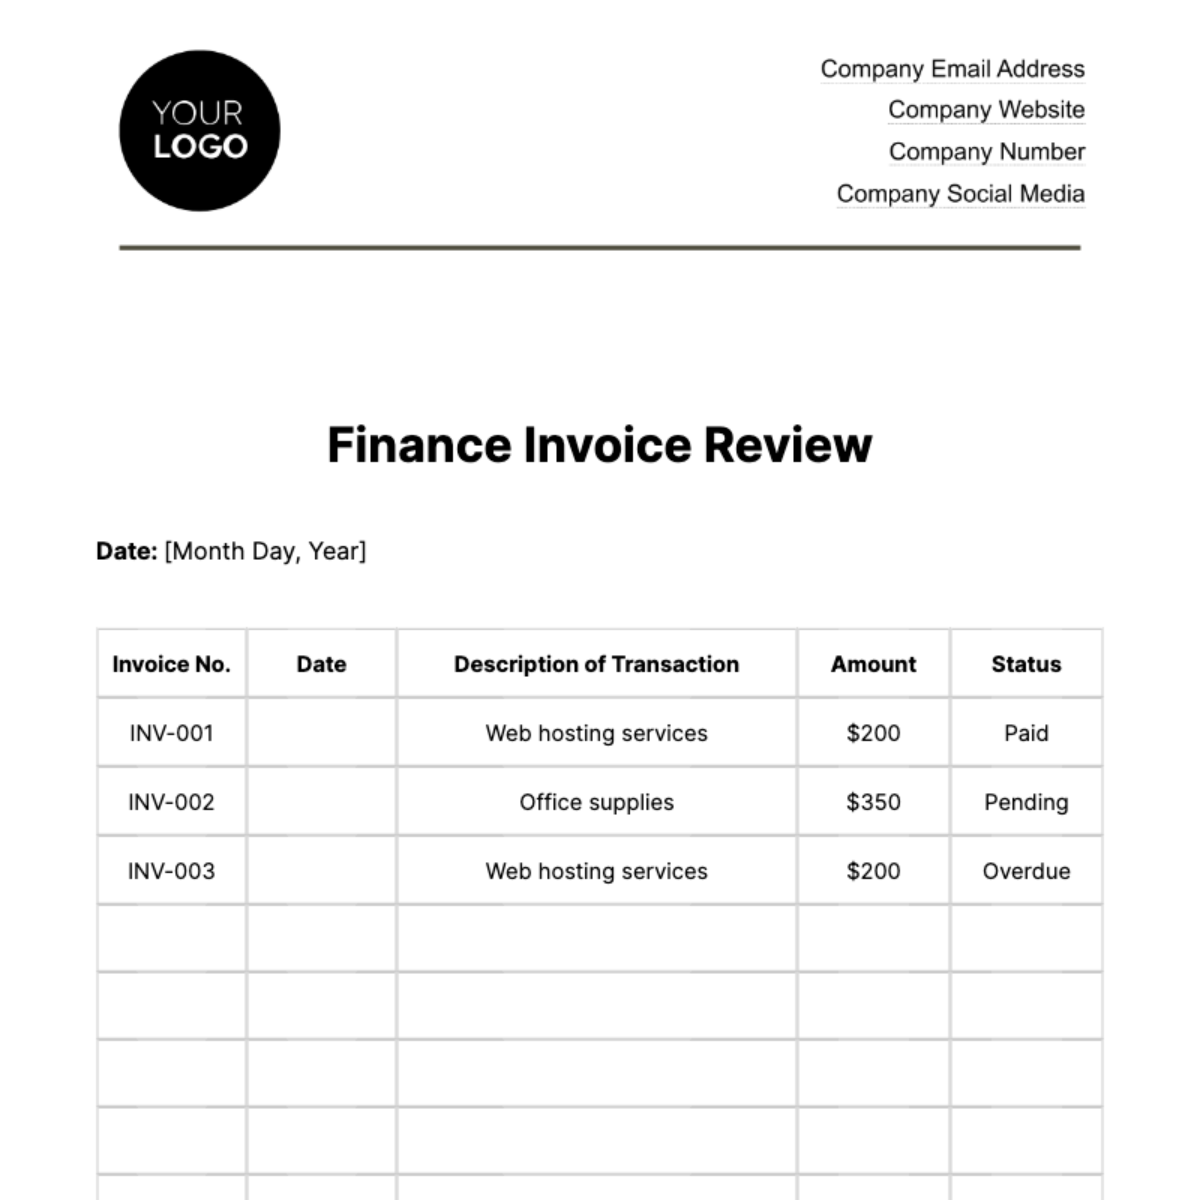 Finance Invoice Review Template